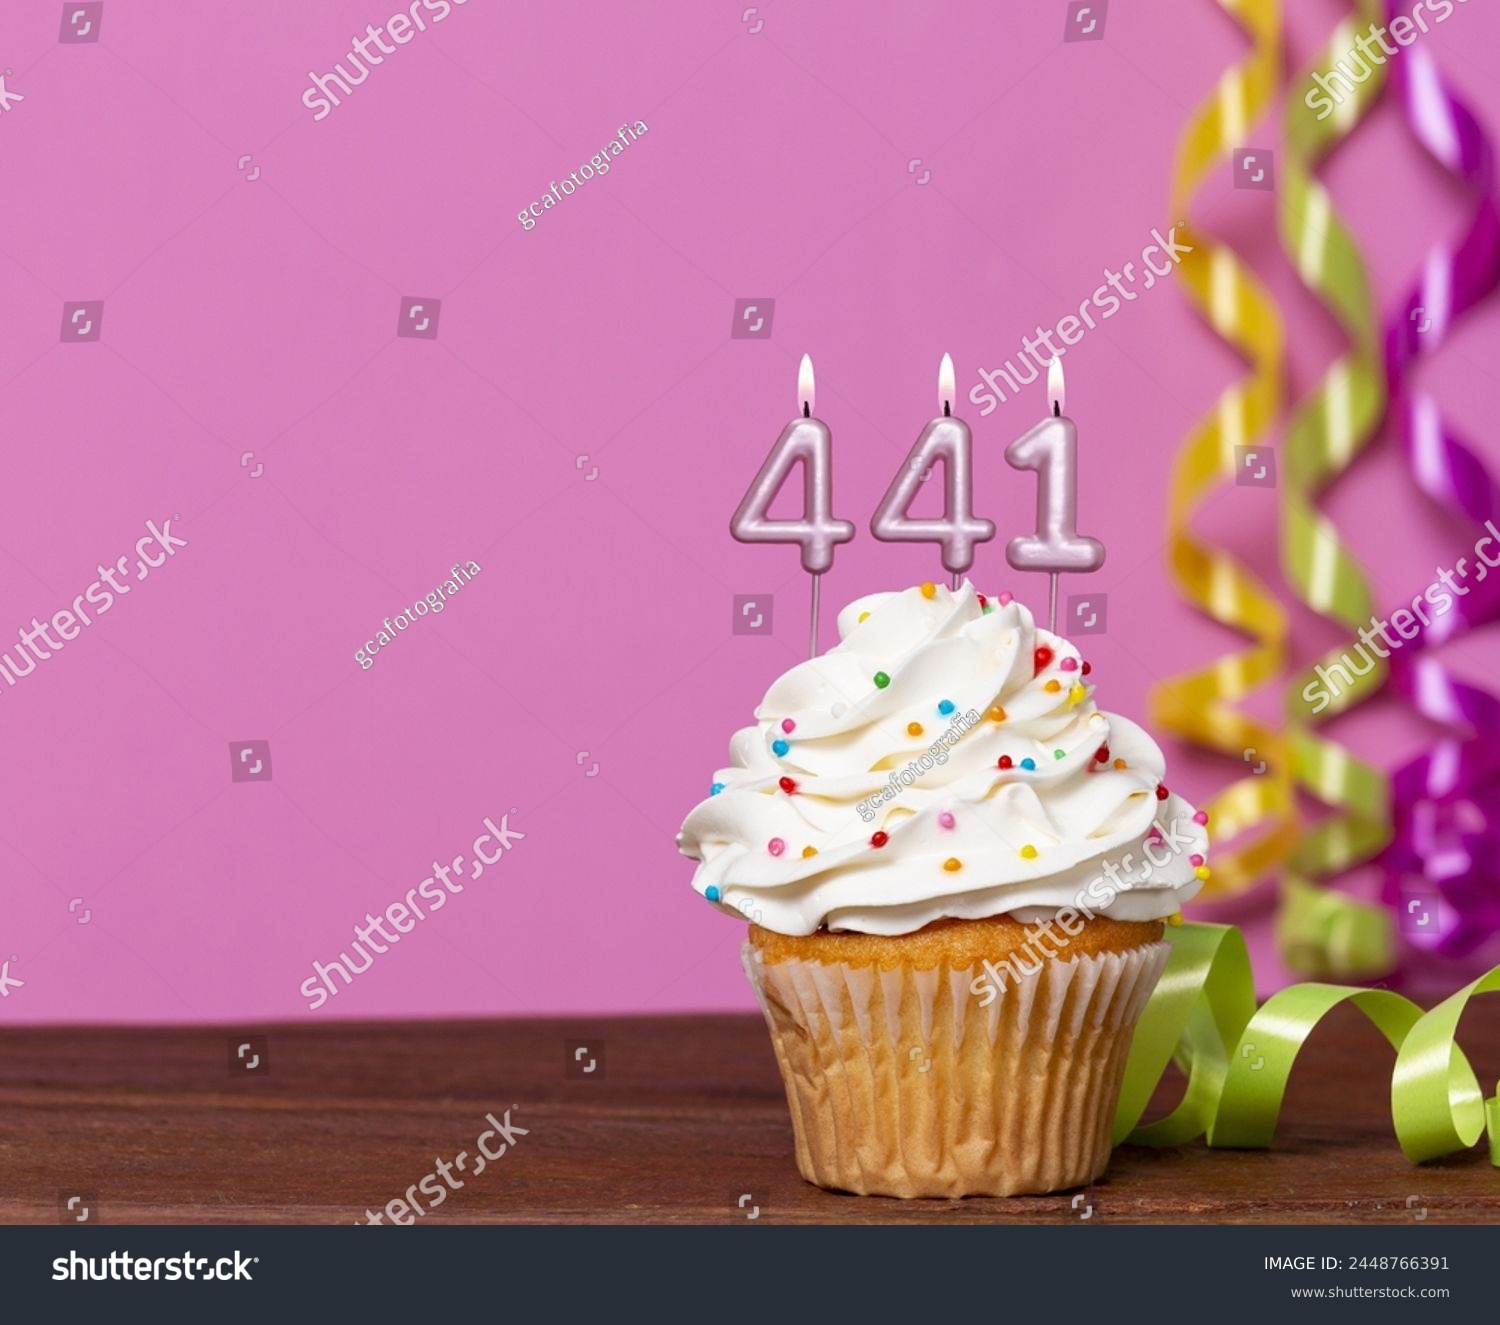 Birthday Cake With Candle Number 441 - On Pink Background. #2448766391